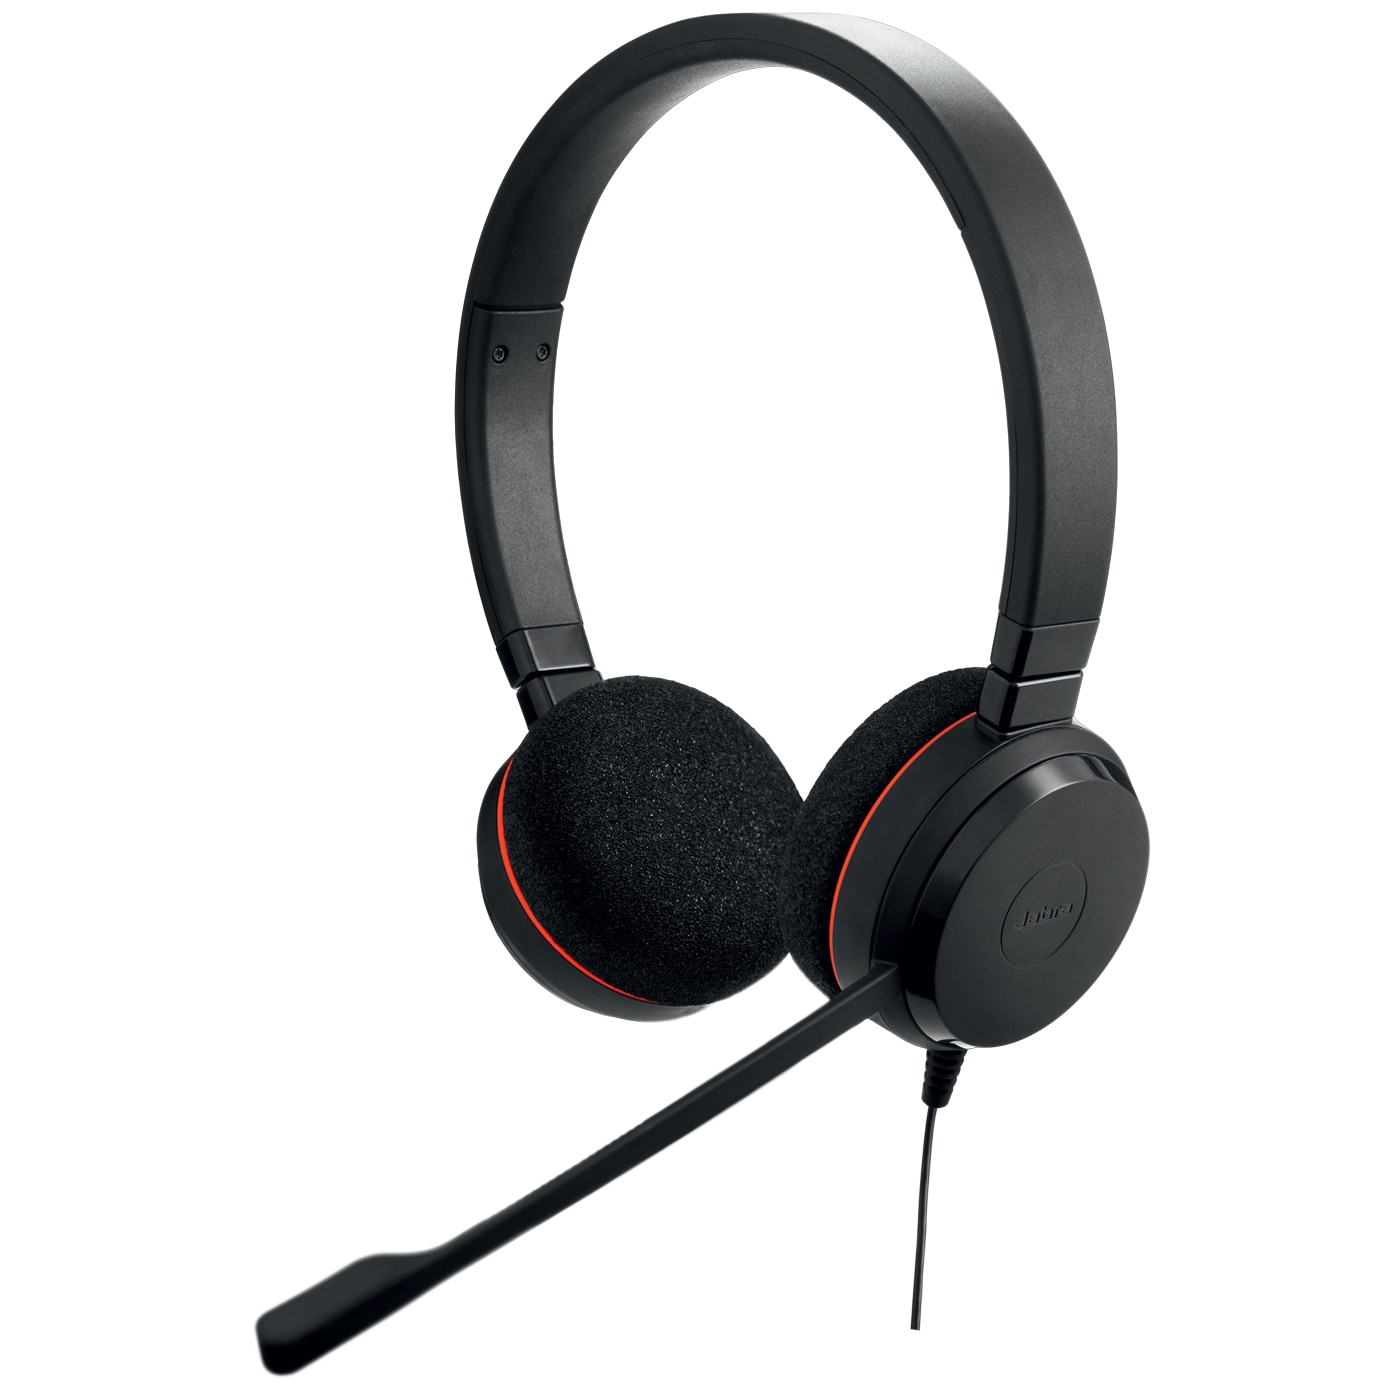 Evolve 20 UC Headset - 100-55900000-02 - Wired Headsets CDW.com